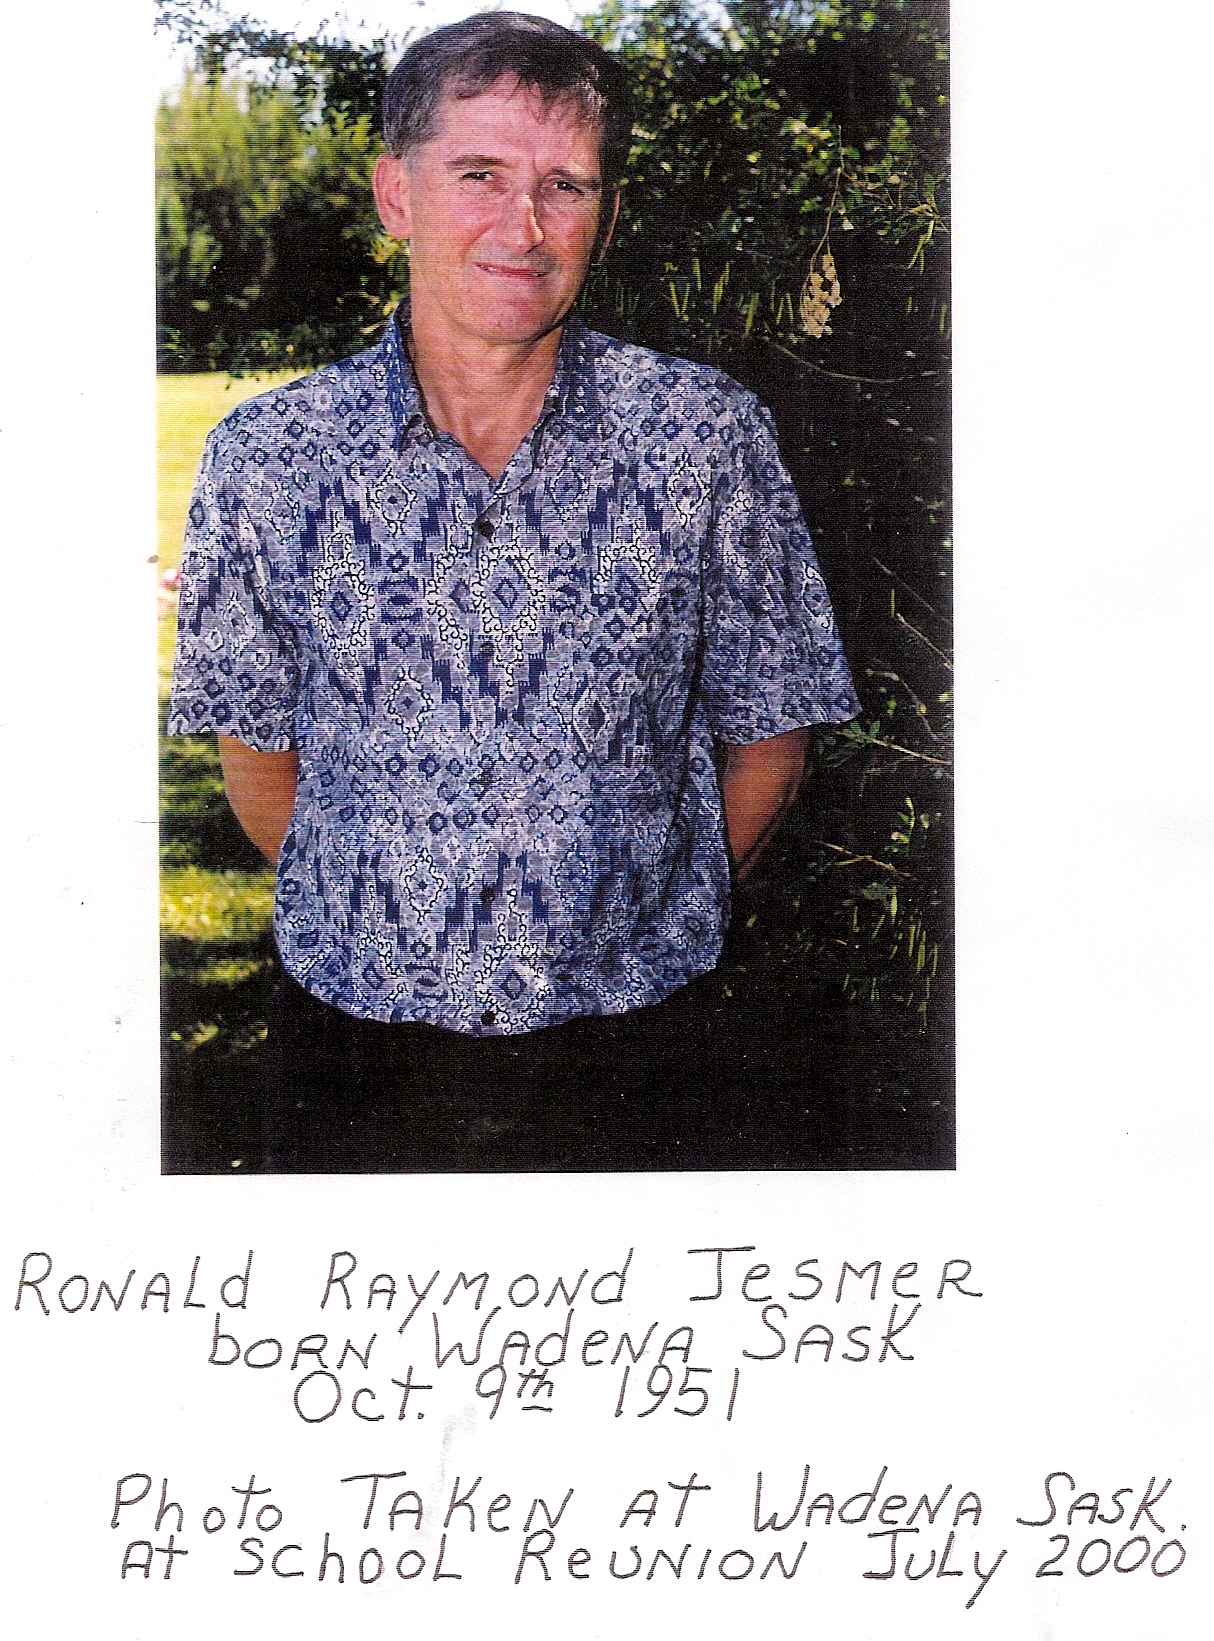 Ron Jesmer in 2003 at a school reunion